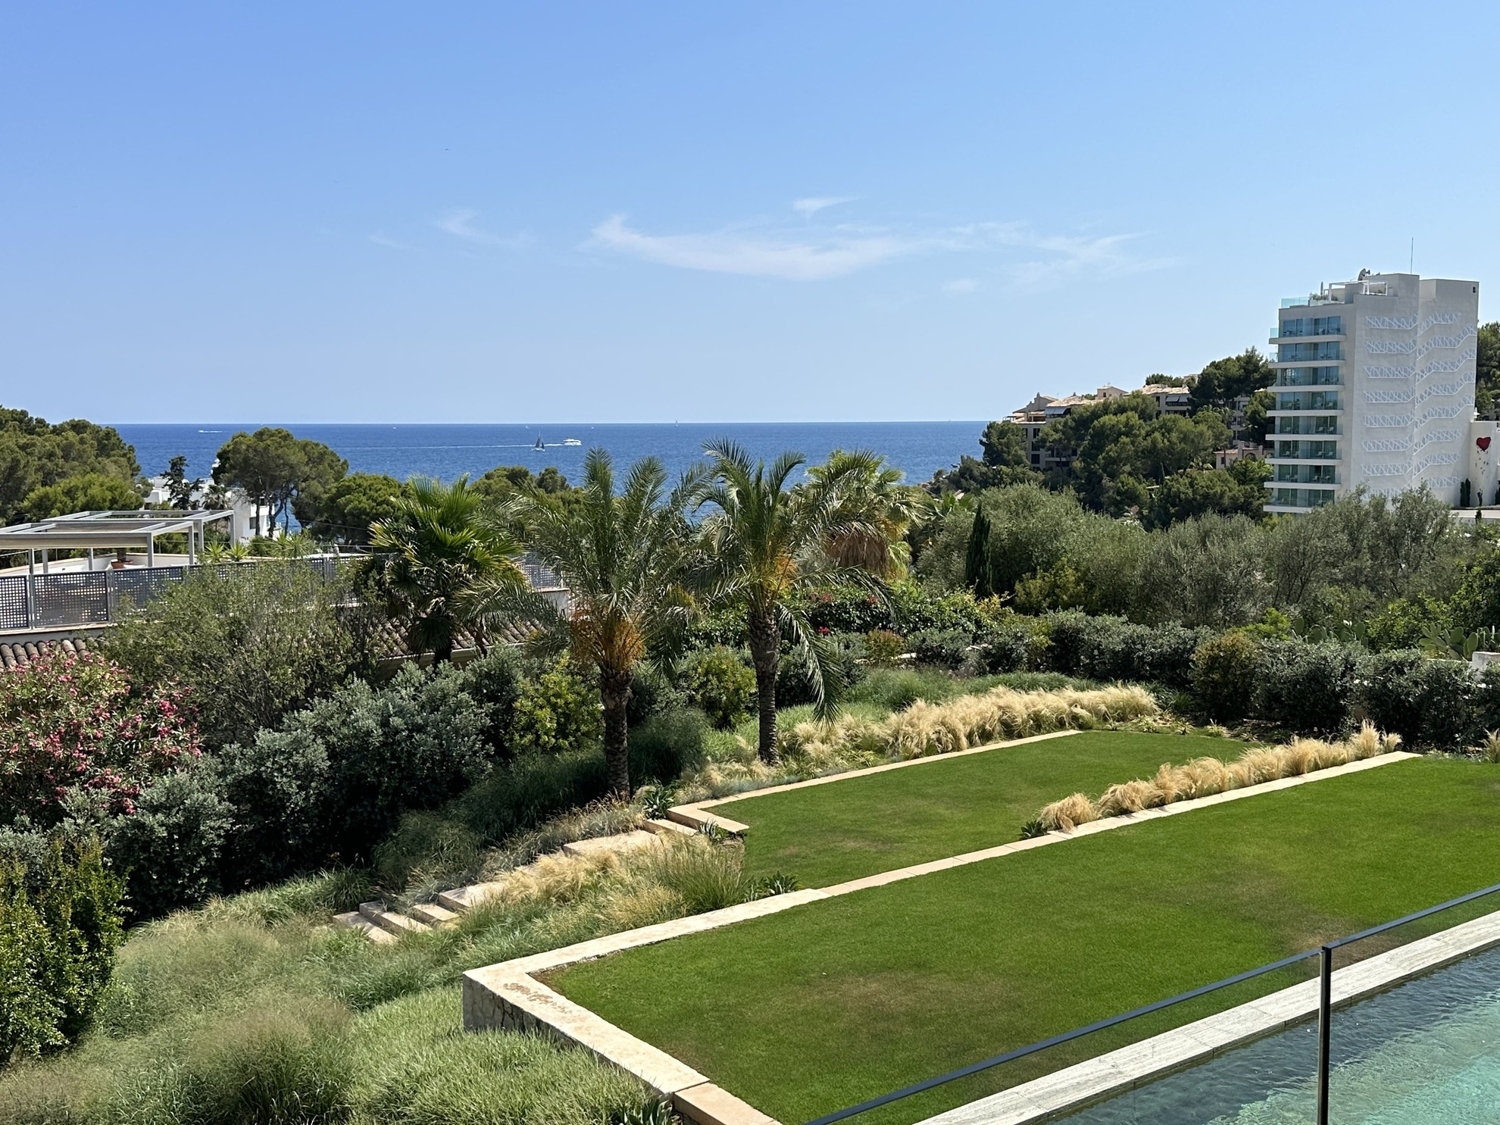 Captivating villa with sea view in Old Bendinat with 950 sqm of luxury living